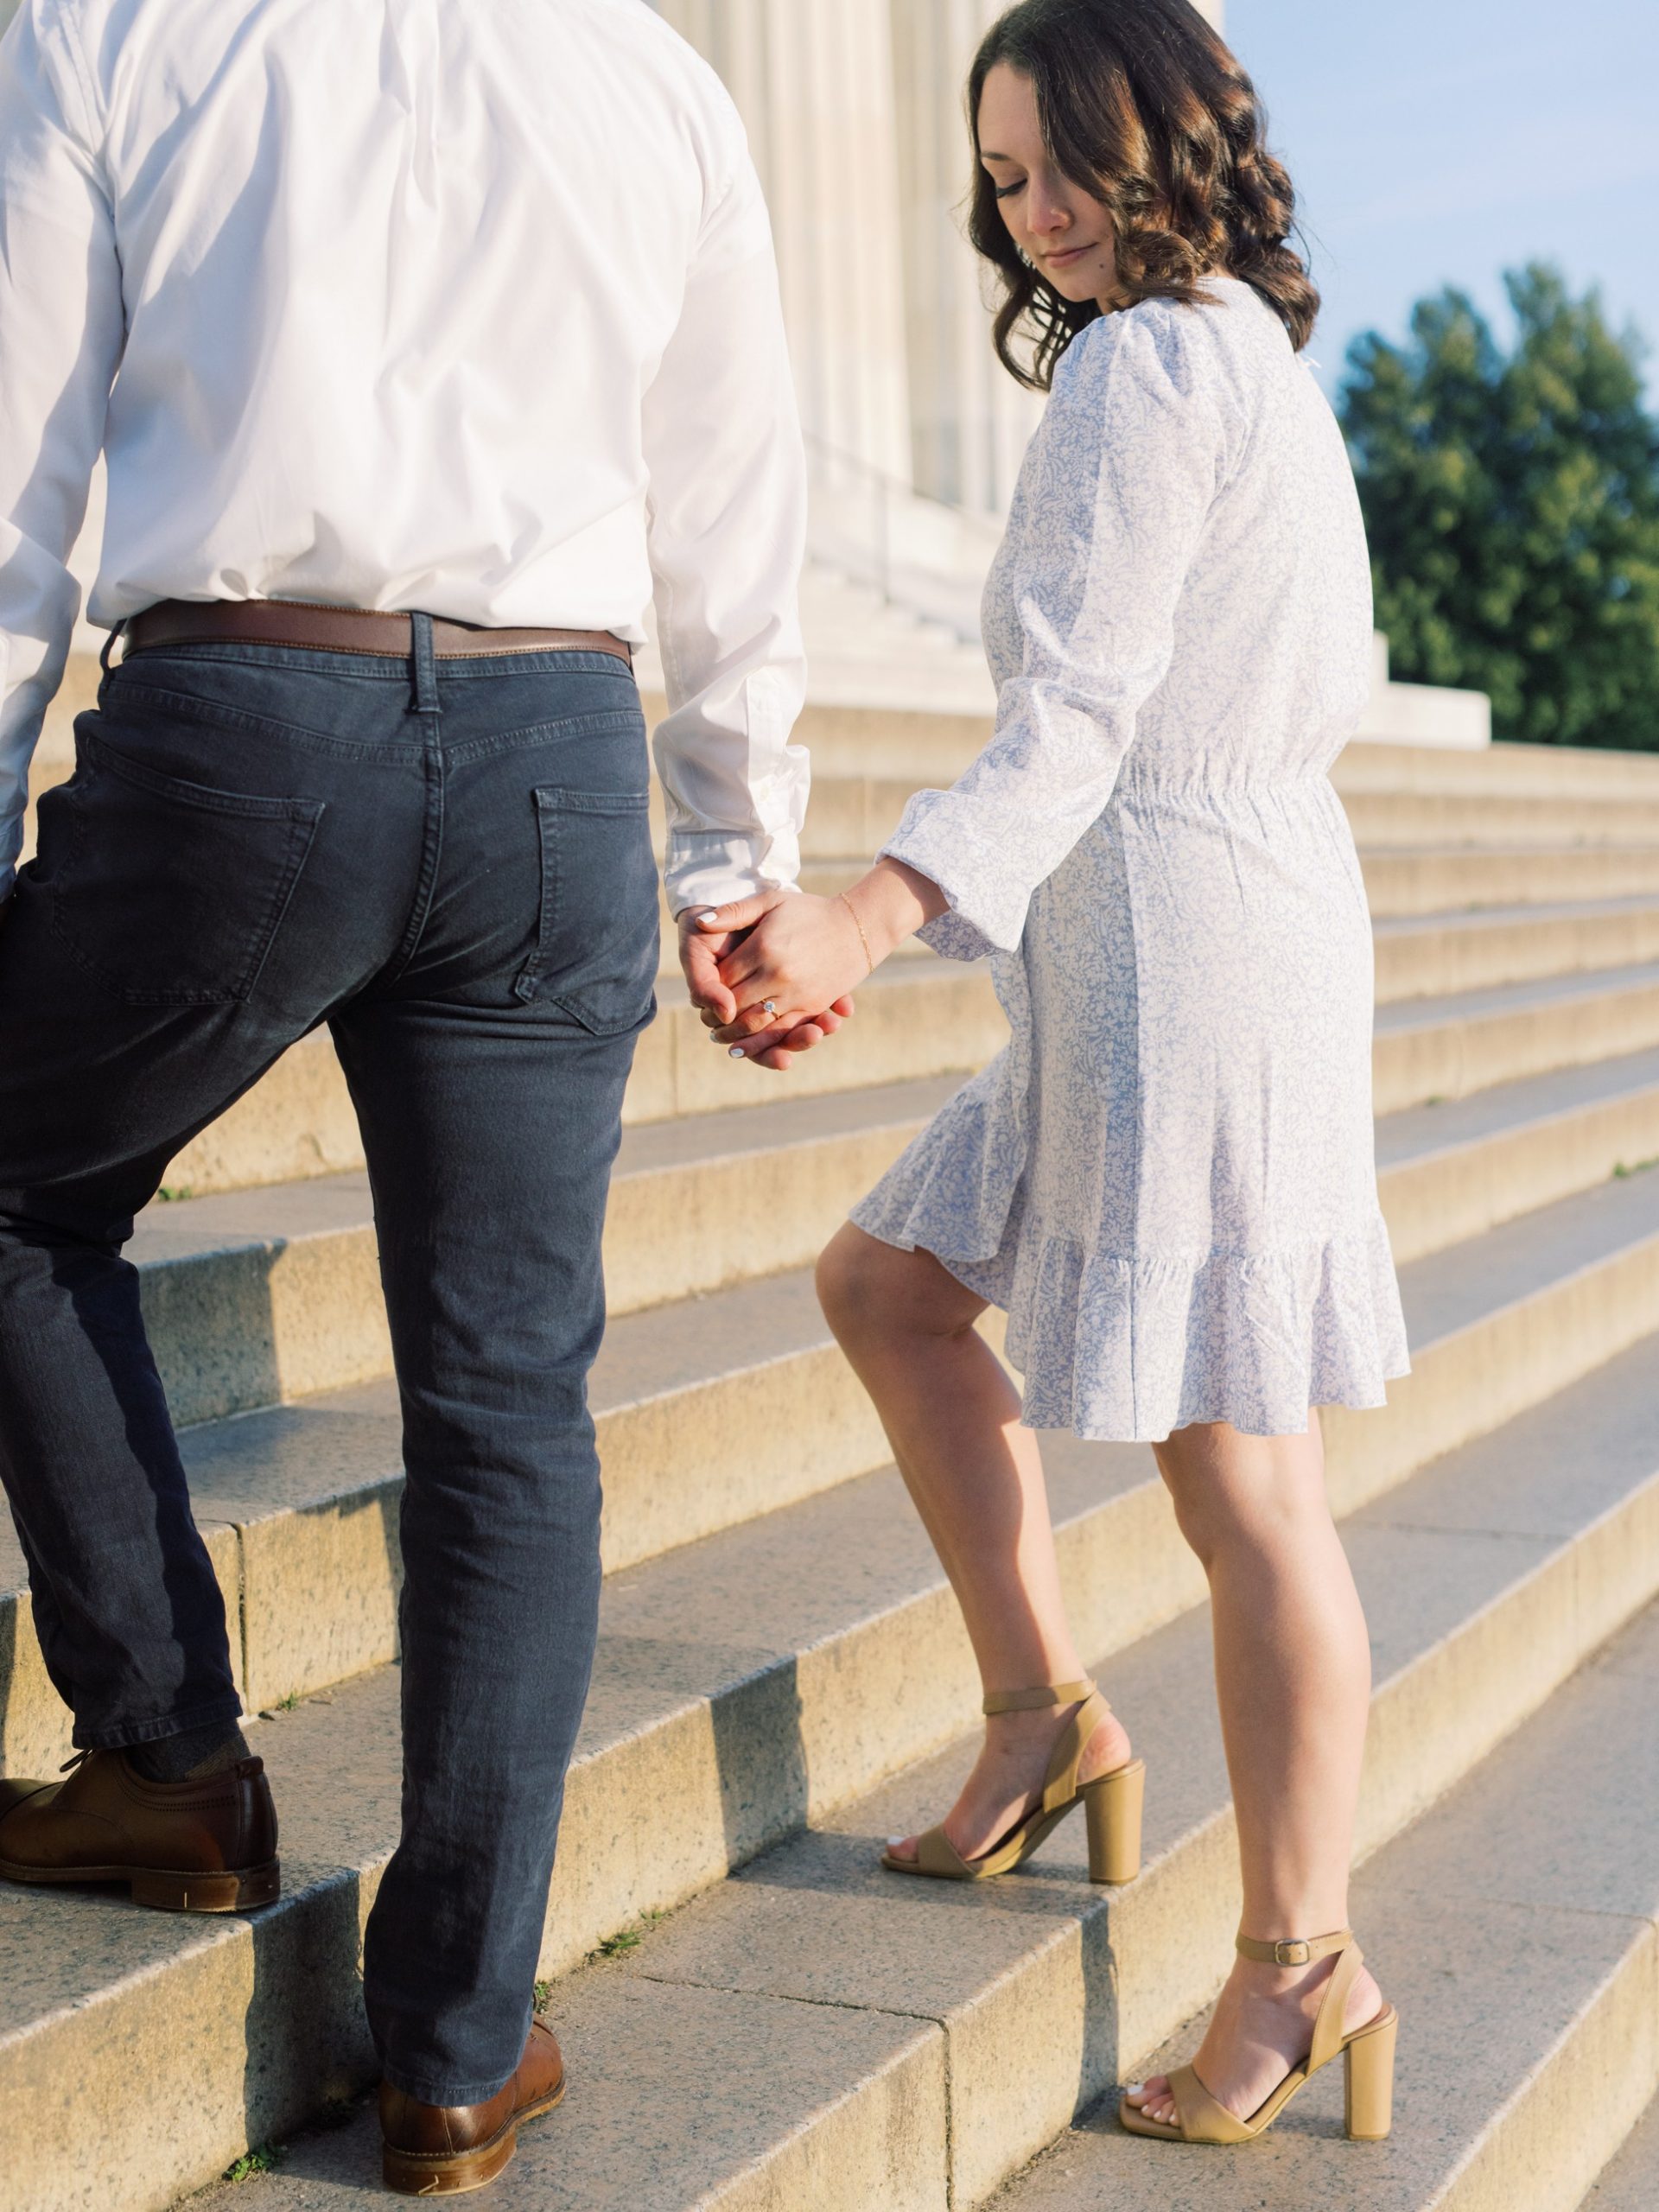 tips for newly engaged couples